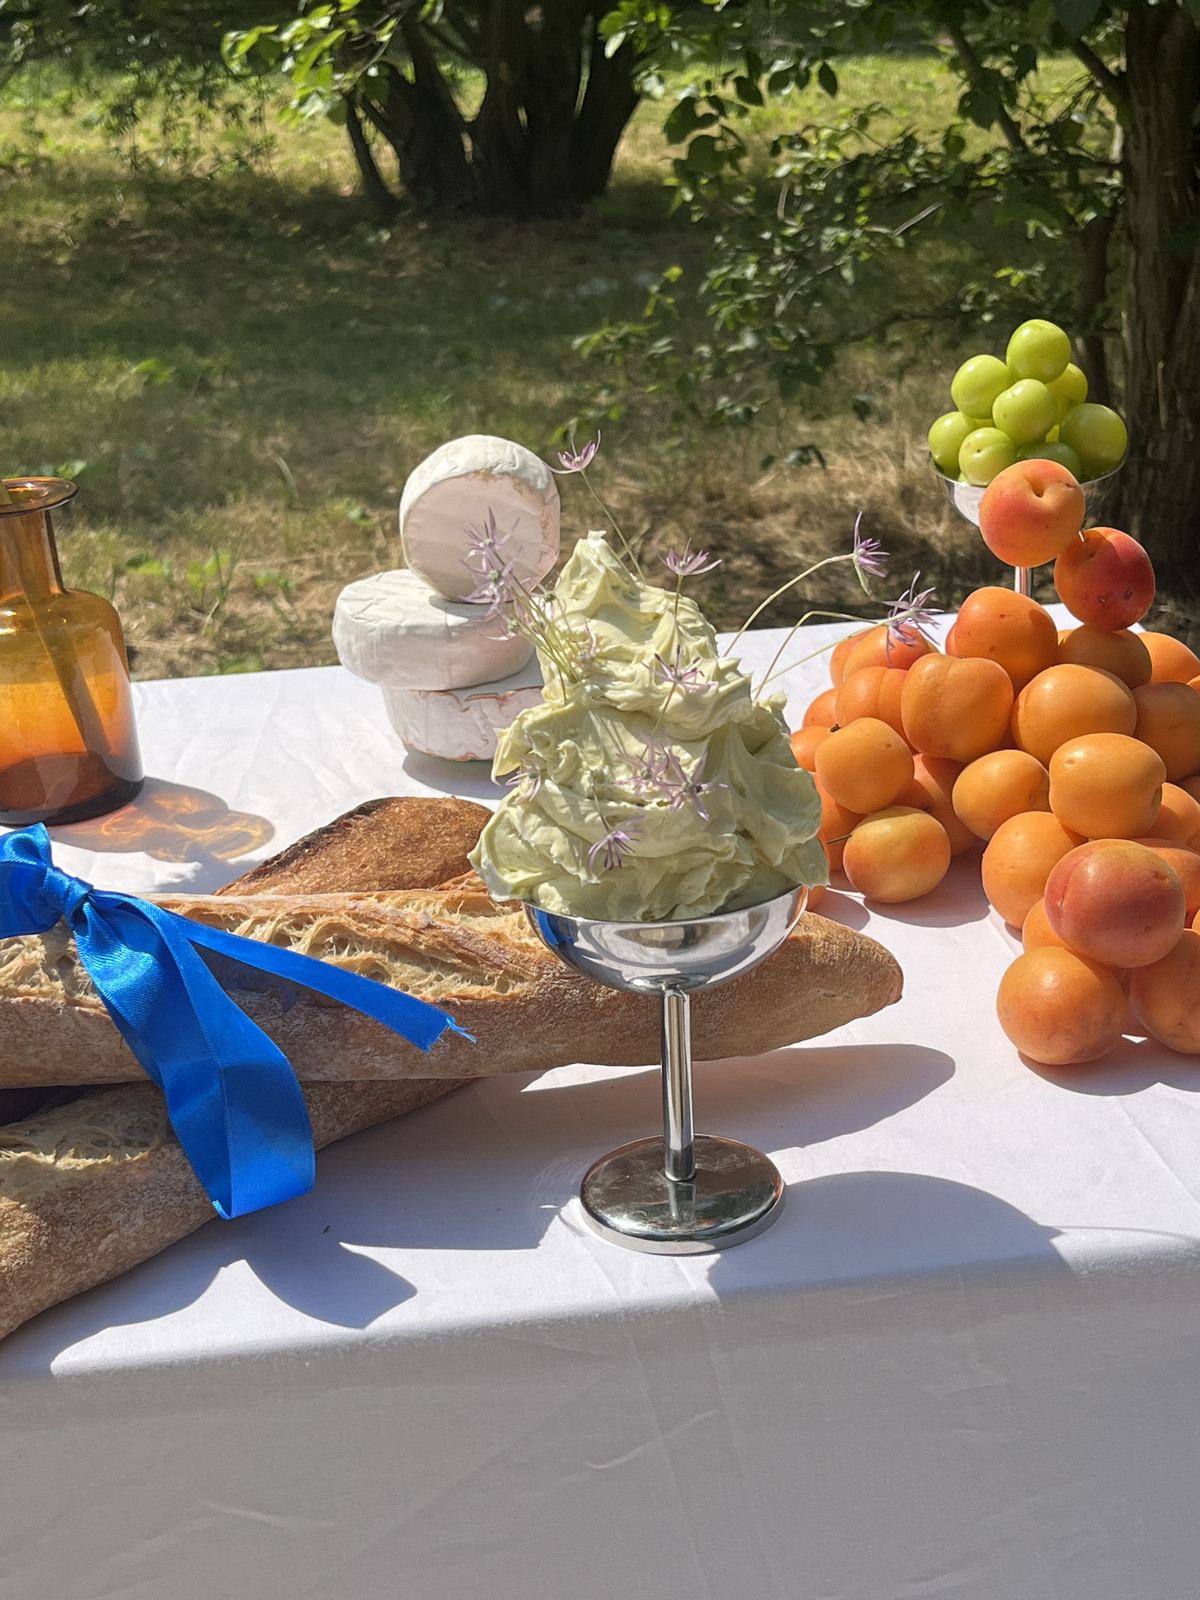 on a white table outdoors is an artistic spread by the culinary studio Herrlich Dining. a metal coupe glass of softened butter with flowers poking out sits front and center, with a pile of peaches to its right and two baguettes tied with a blue ribbon to its left. in the background are stacked wheels of cheese